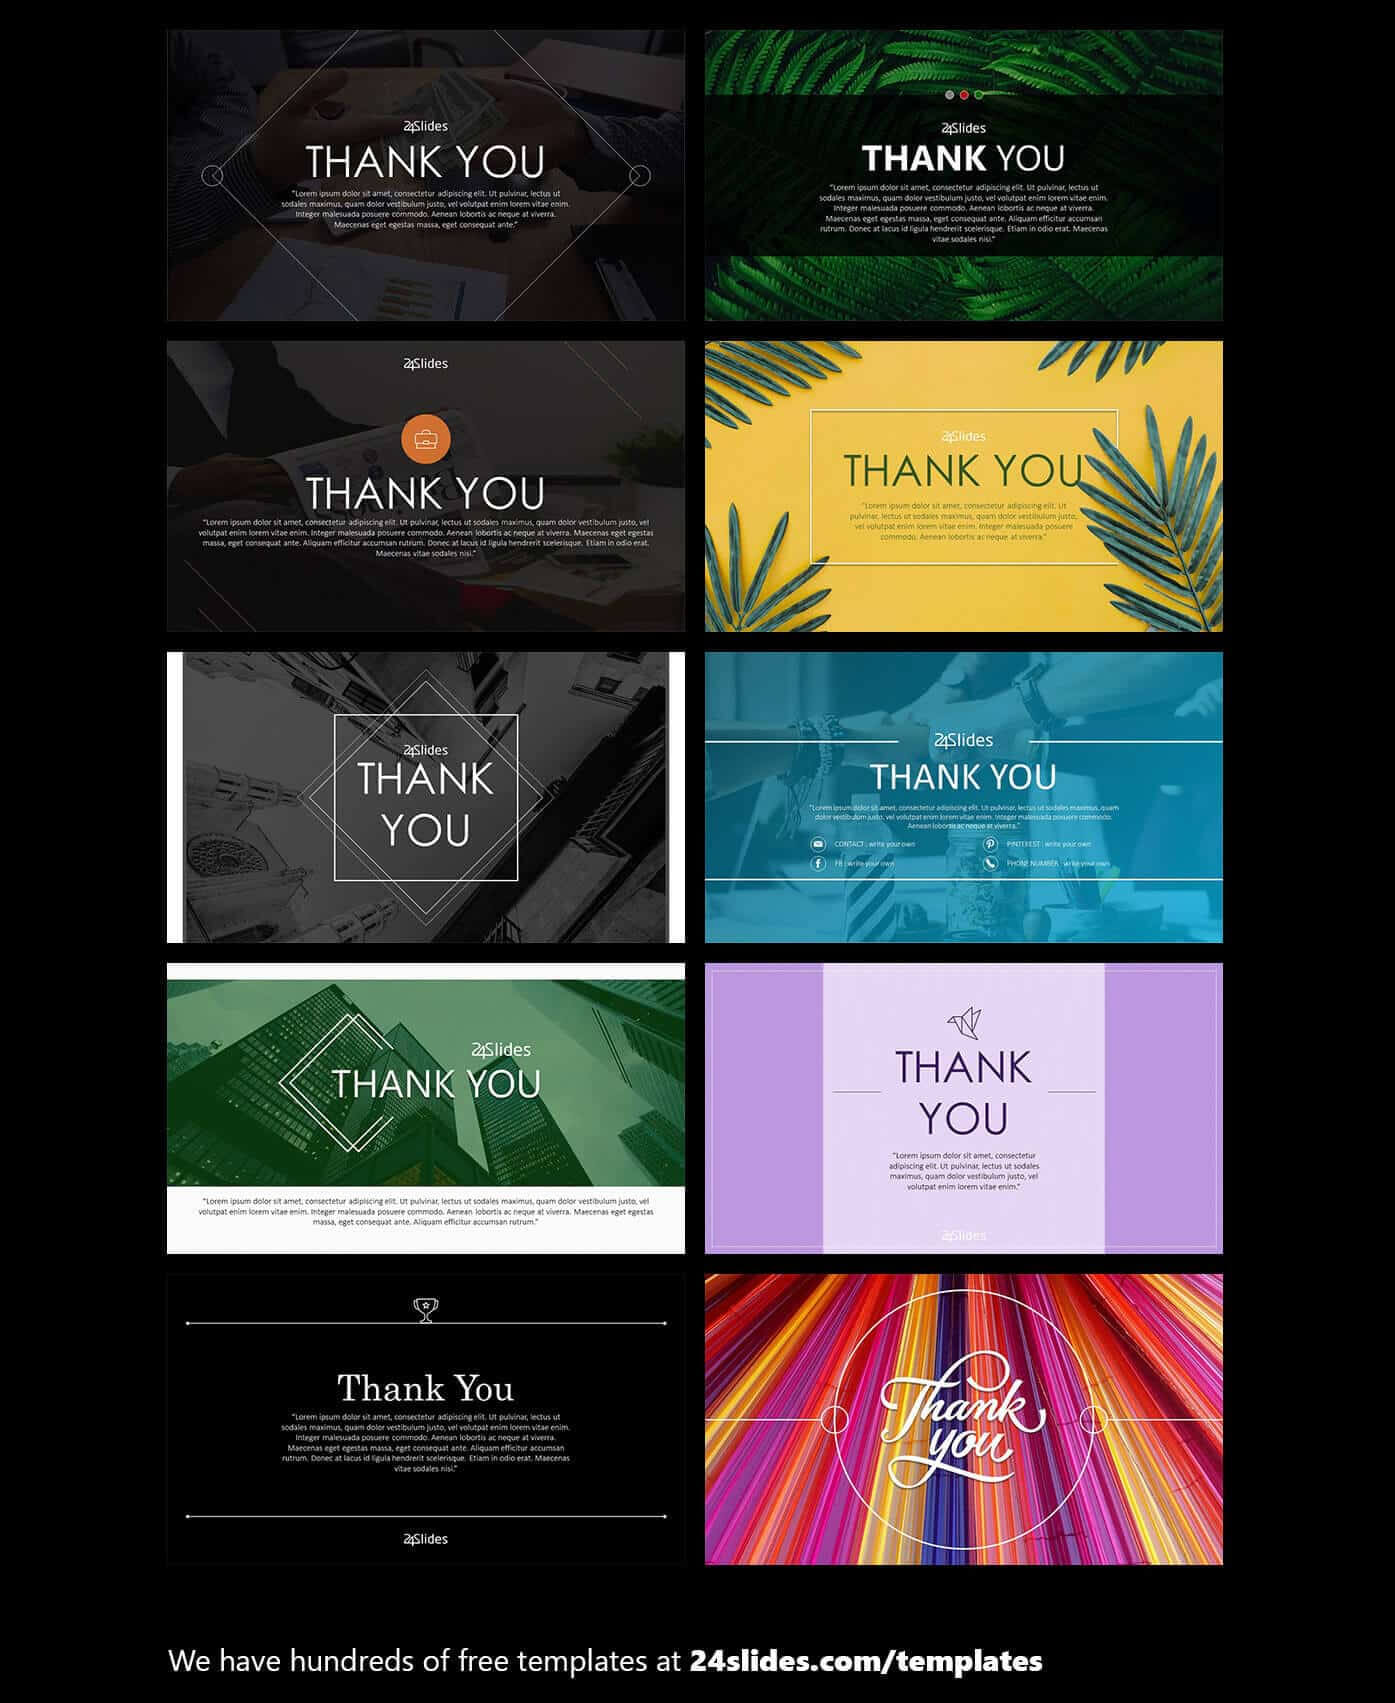 15 Fun And Colorful Free Powerpoint Templates | Present Better Inside Powerpoint Photo Slideshow Template